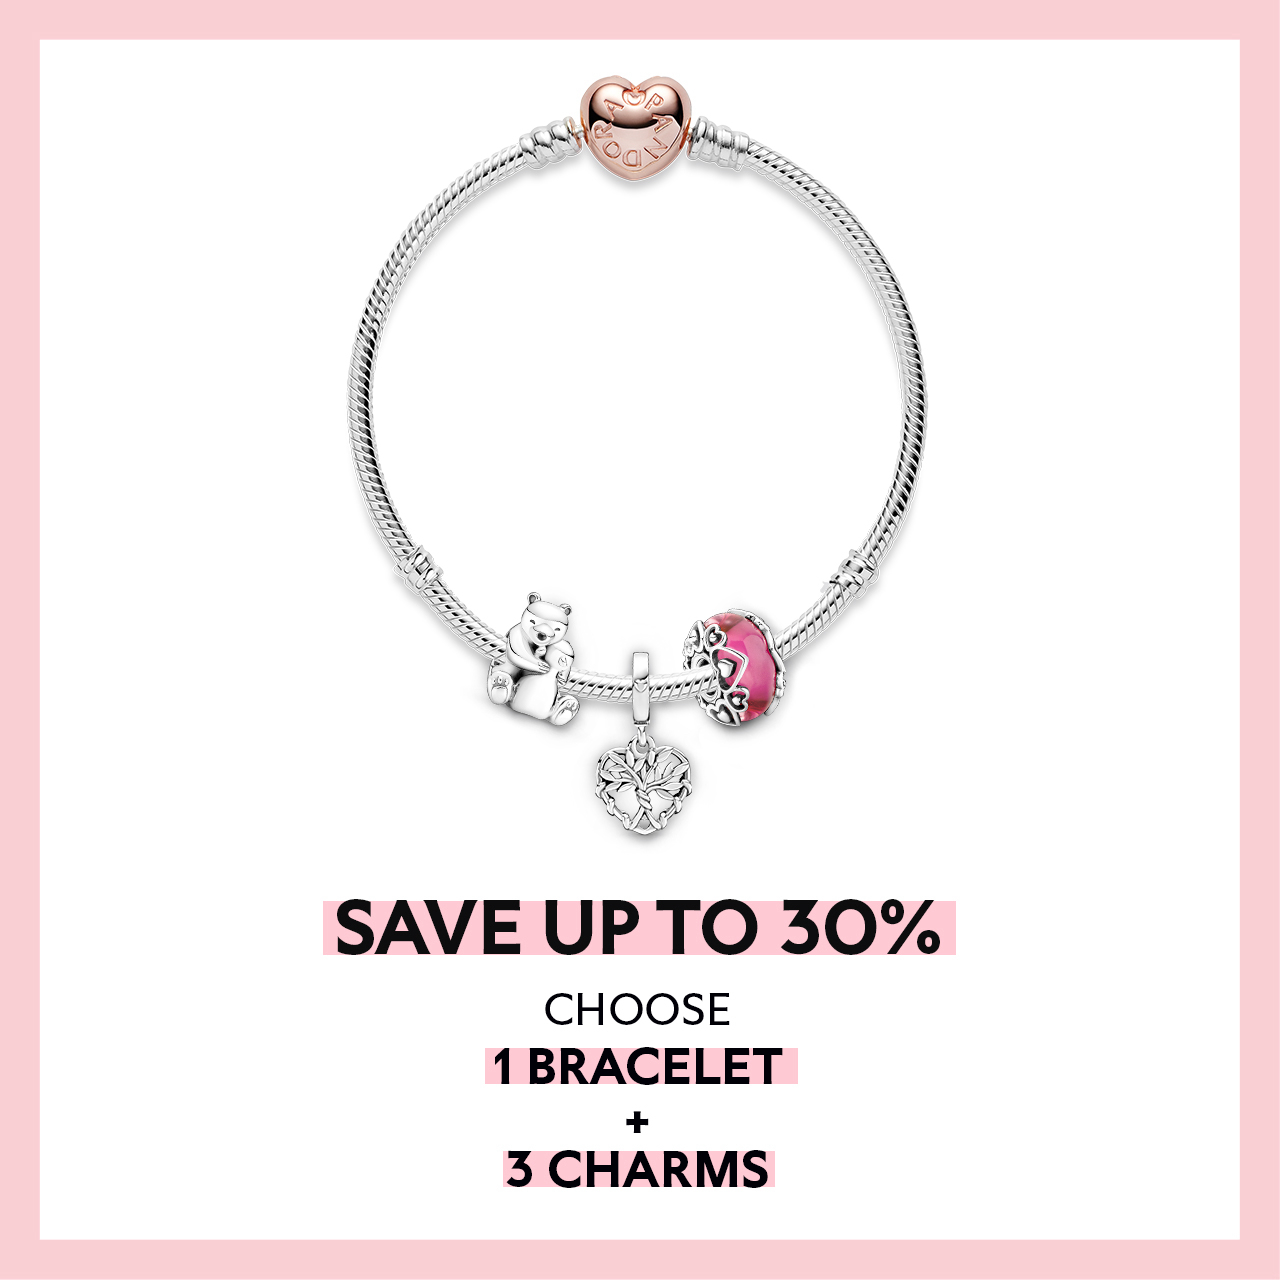 Pandora - Campaign #81 - Save up to 30% and Build Your Own Bracelet Gift Set with Pandora. - EN - 1280x1280